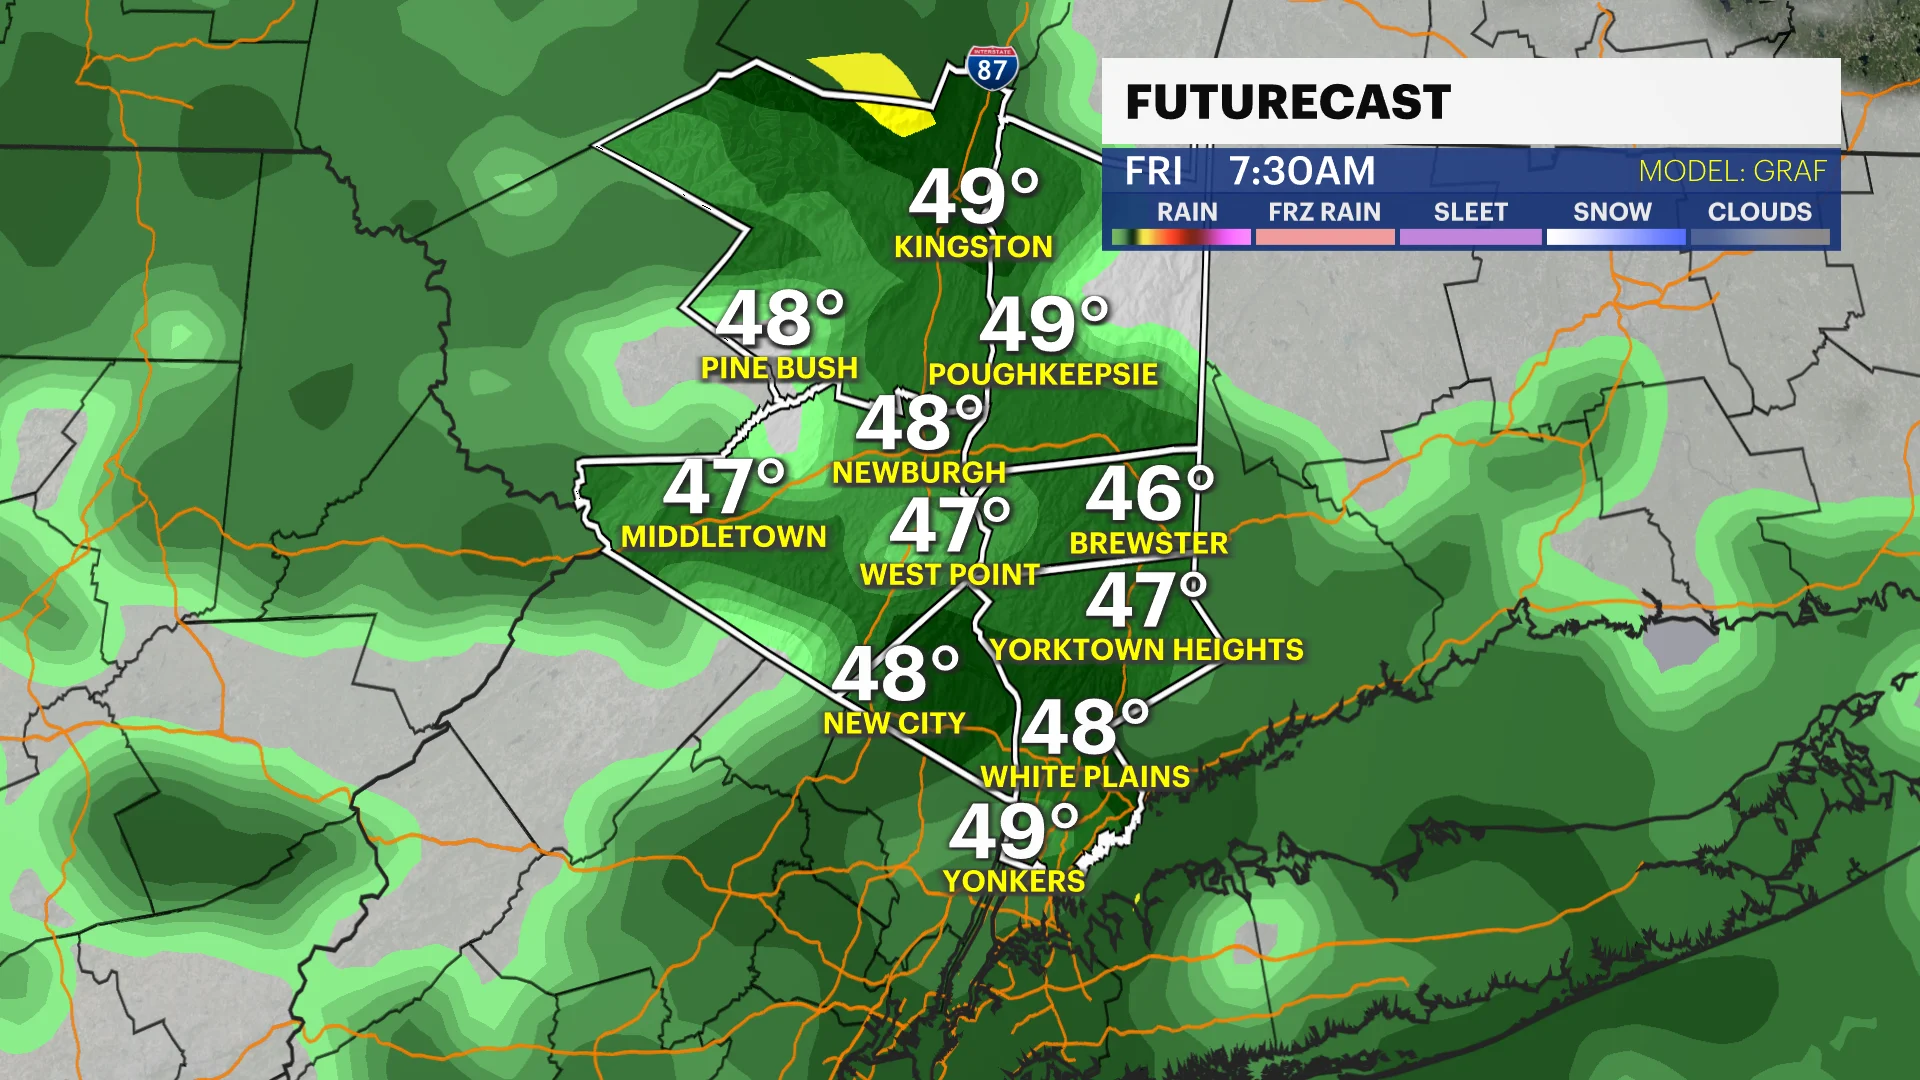 Dry for most of the day today; on and off light showers tonight through Mother’s Day